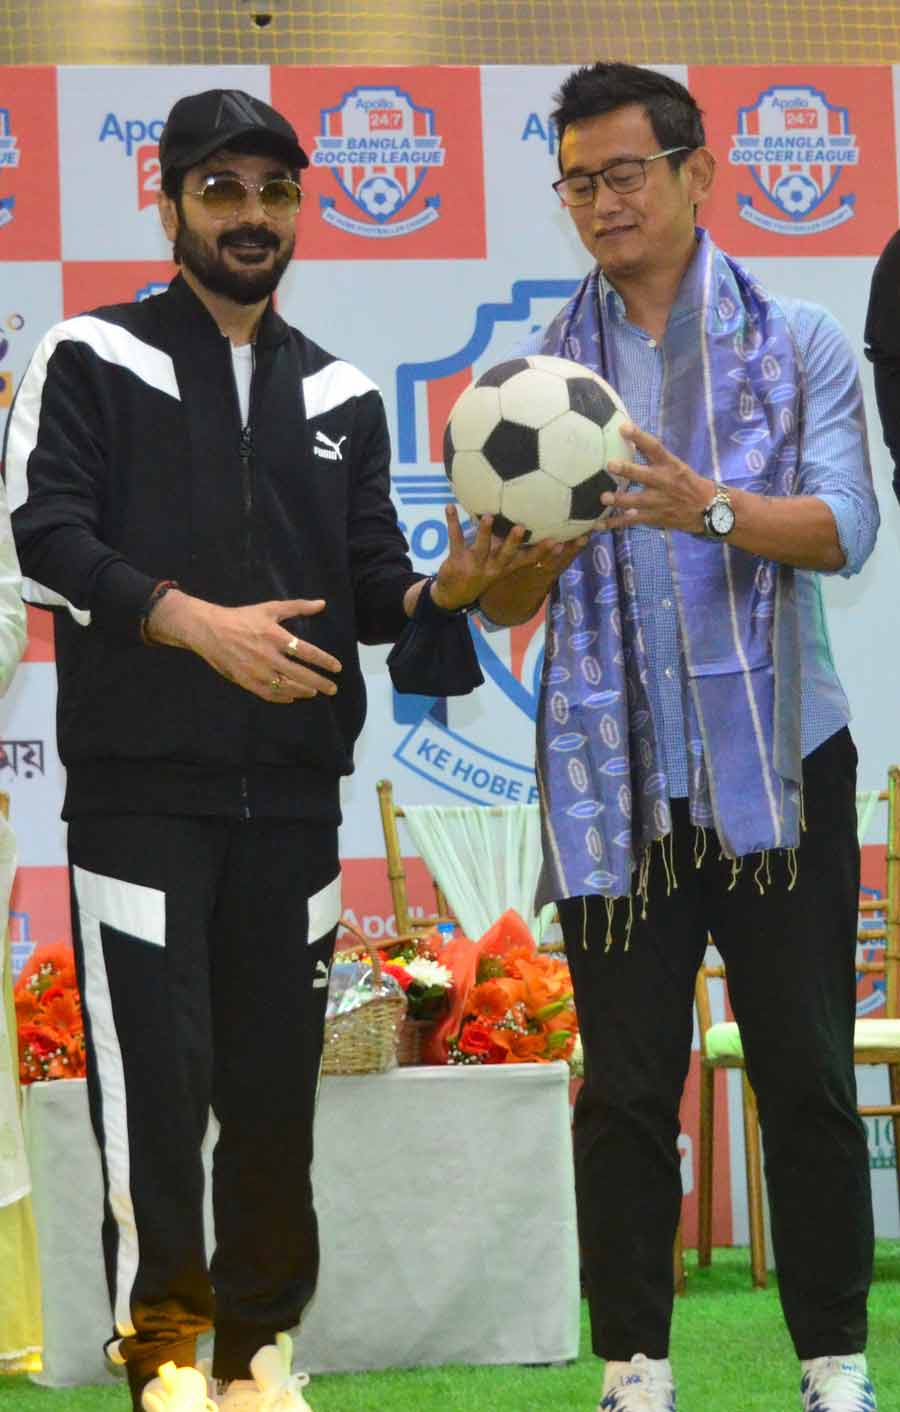 (From left) Actor Prosenjit Chatterjee and former India football team captain Bhaichung Bhutia at the inauguration of ‘Apollo 24|7 BANGLA SOCCER LEAGUE - Ke Hobe Footballer Champ’ at South City Mall on Monday.